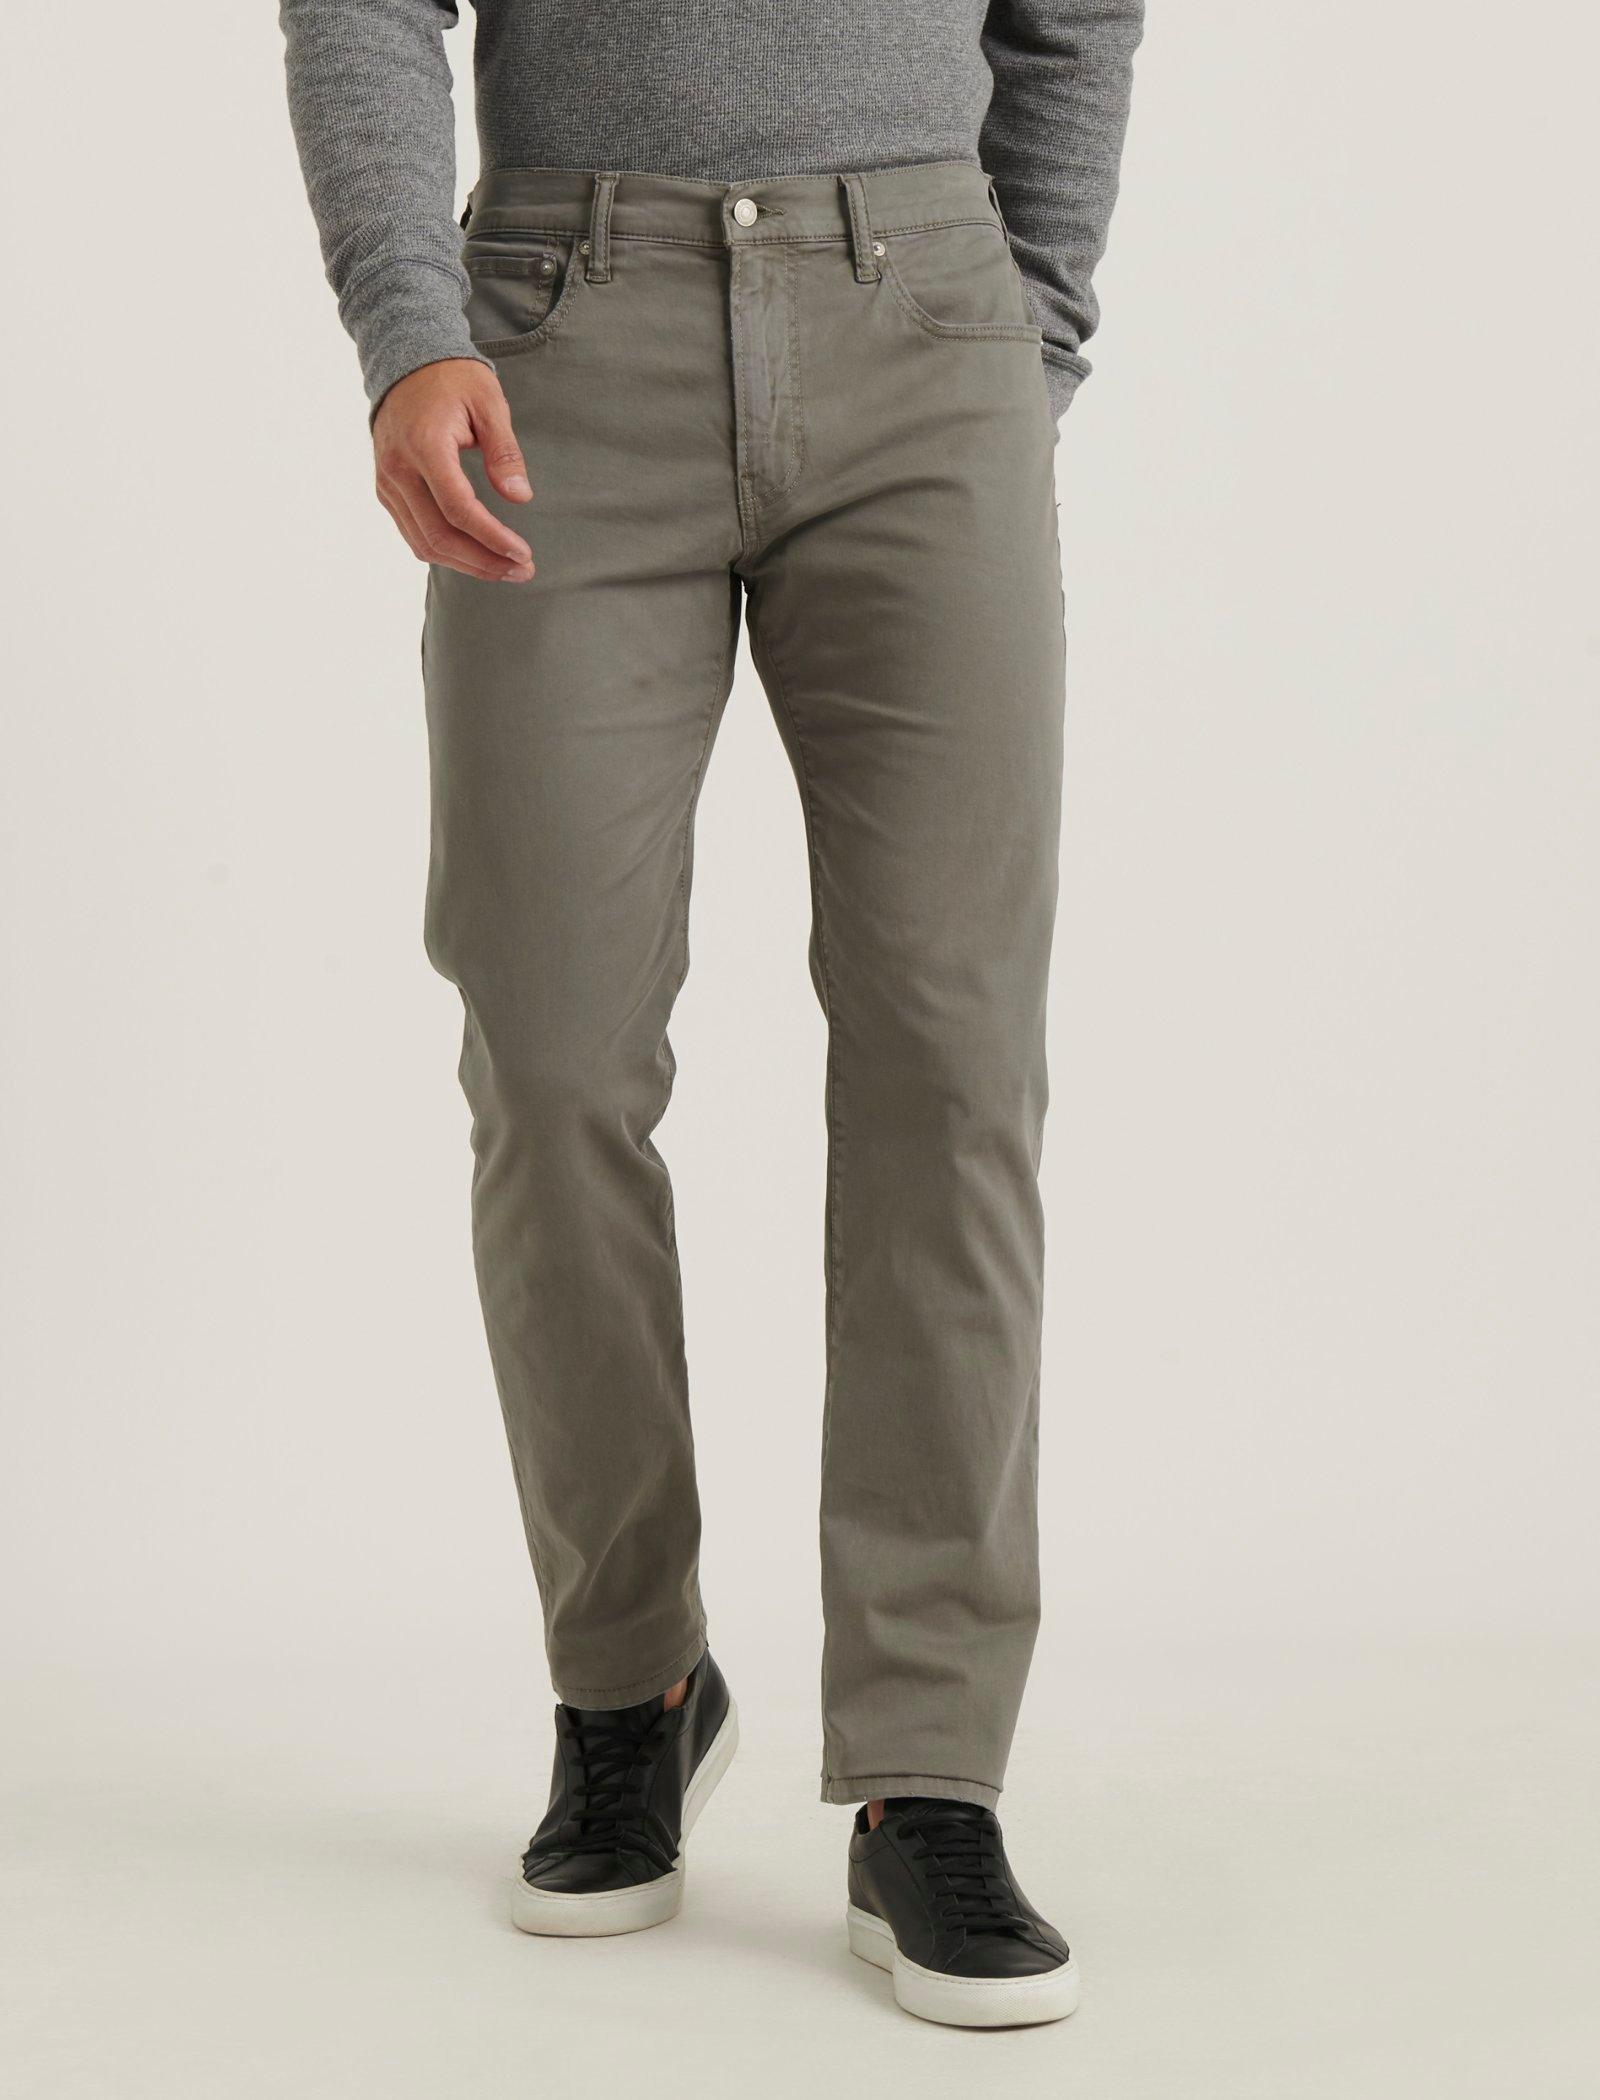 lucky brand gray jeans